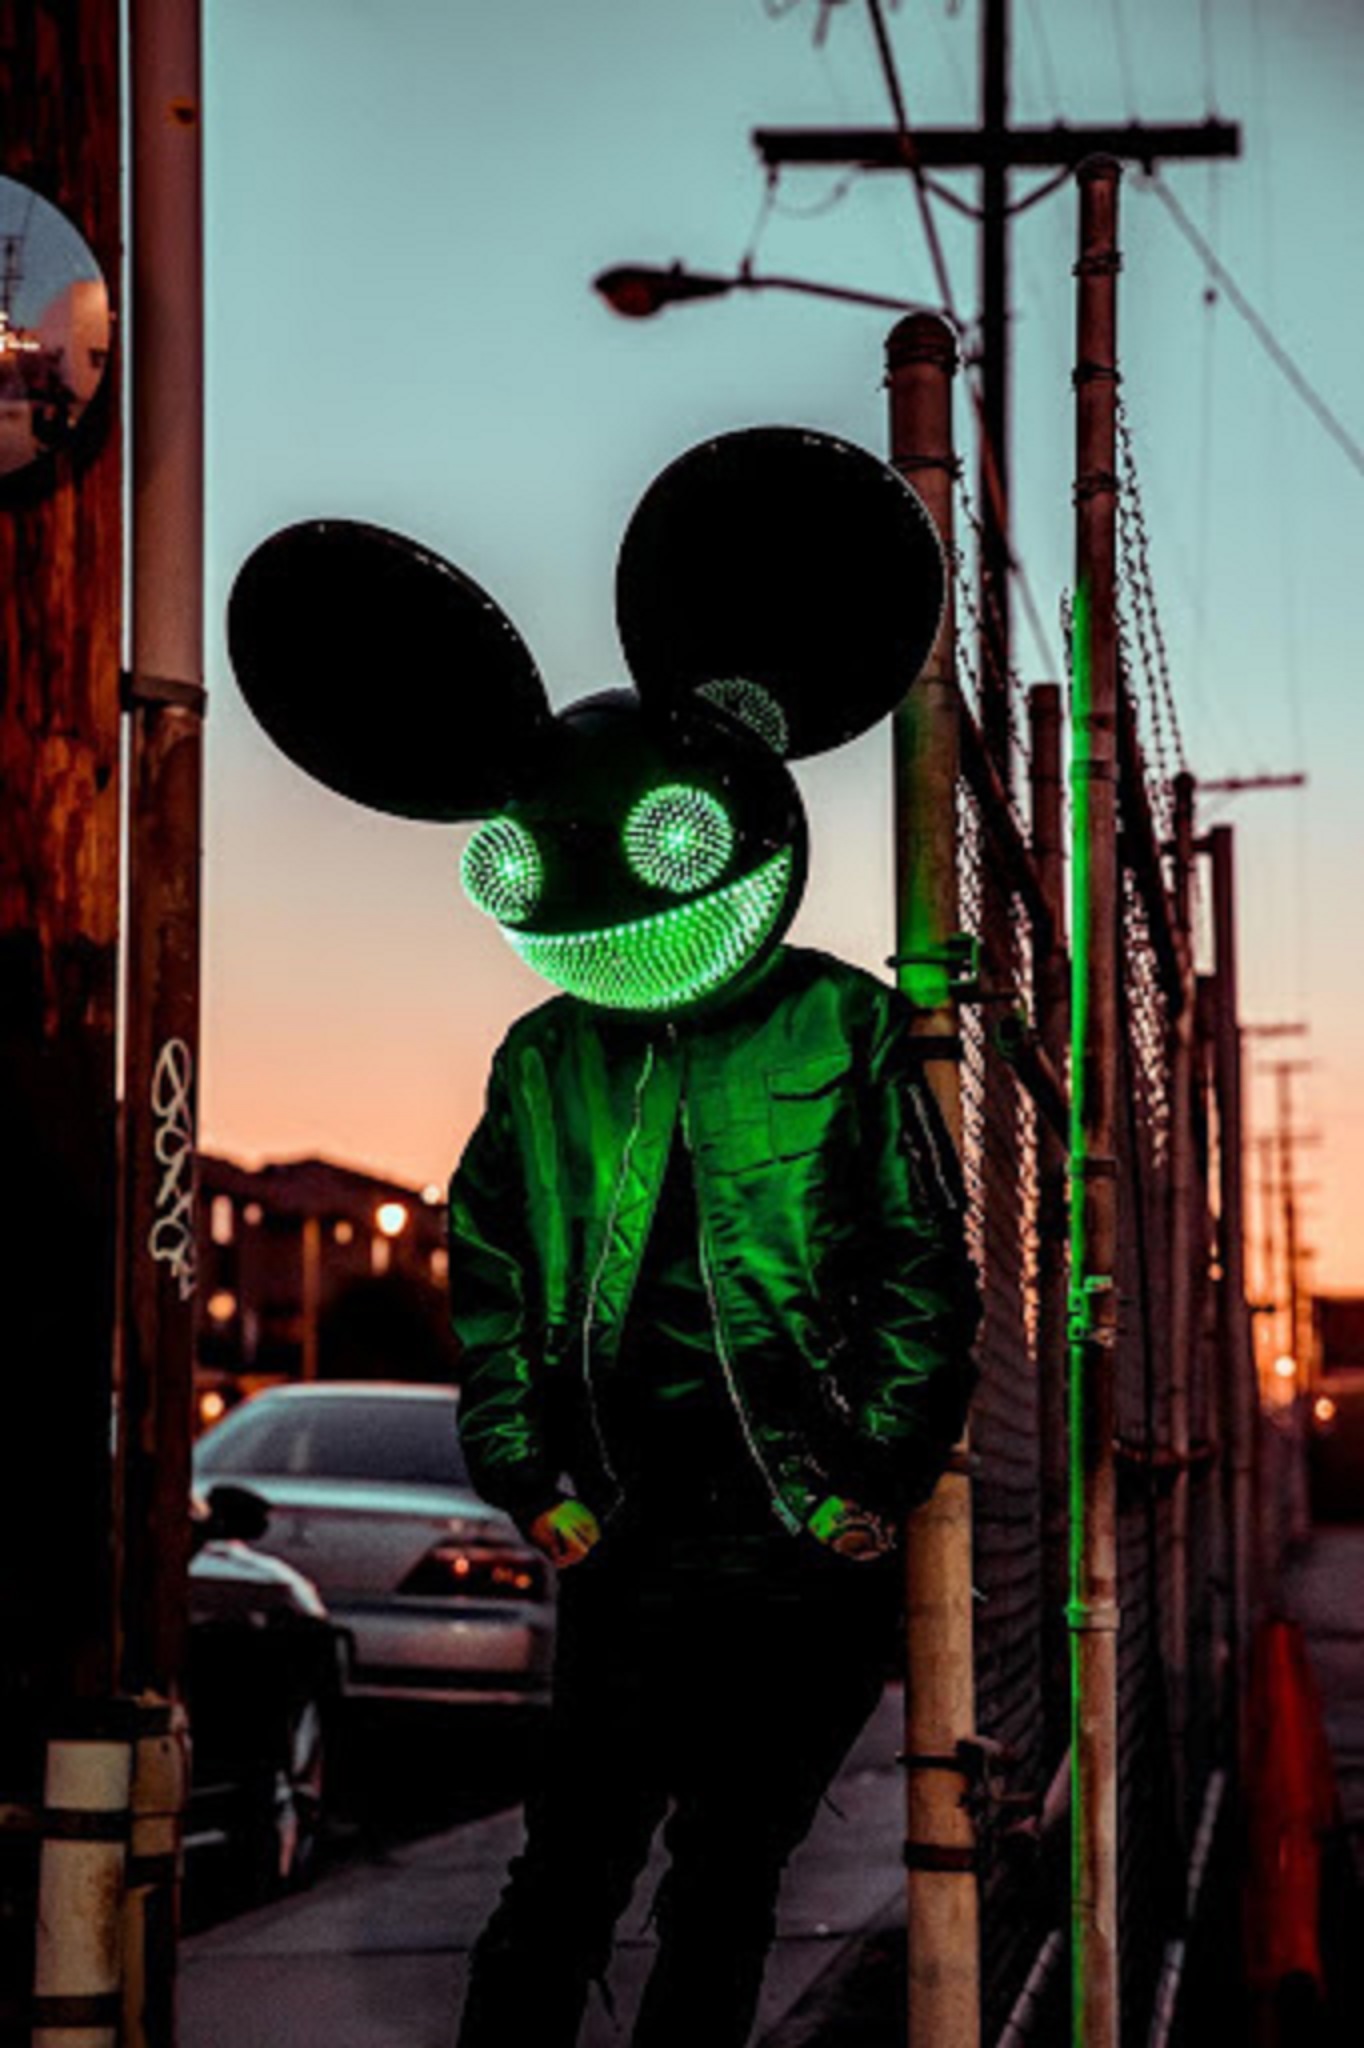 deadmau5 New Single "XYZ" Out Today, June 17; 'we are friends' Tour Launching July 15 in Philadelphia